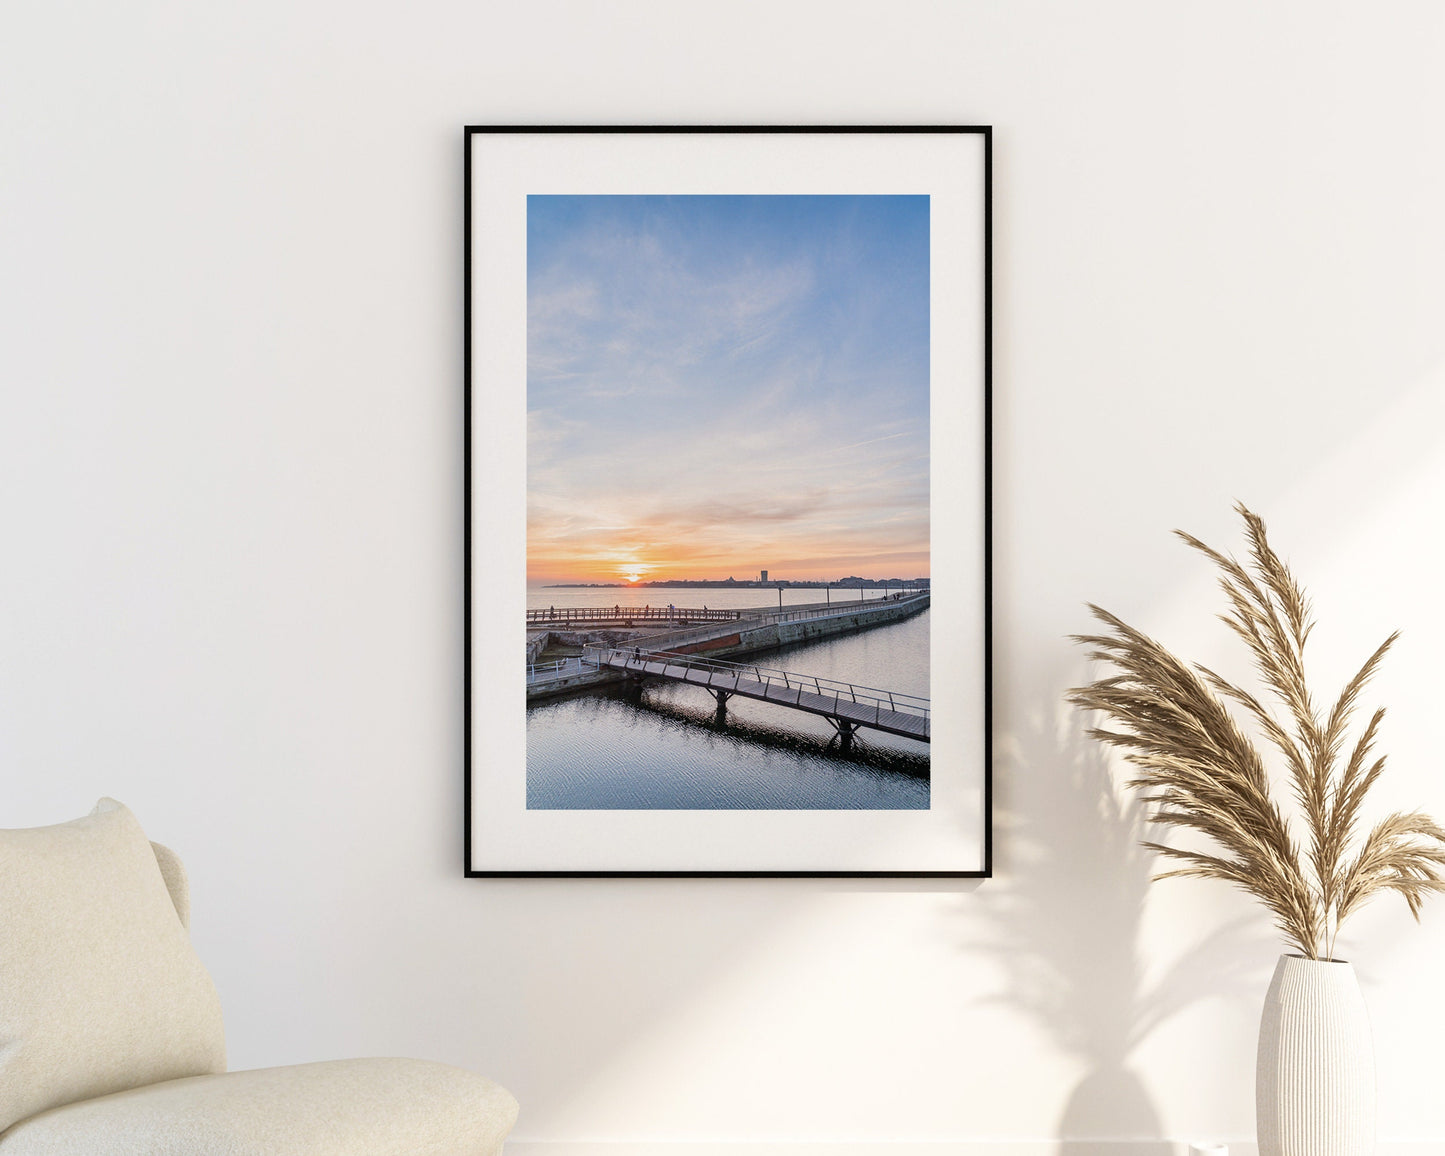 Southsea Sunsets - Photography Print - Portsmouth and Southsea Prints - Wall Art -  Frame and Canvas Options -  Portrait - Aerial